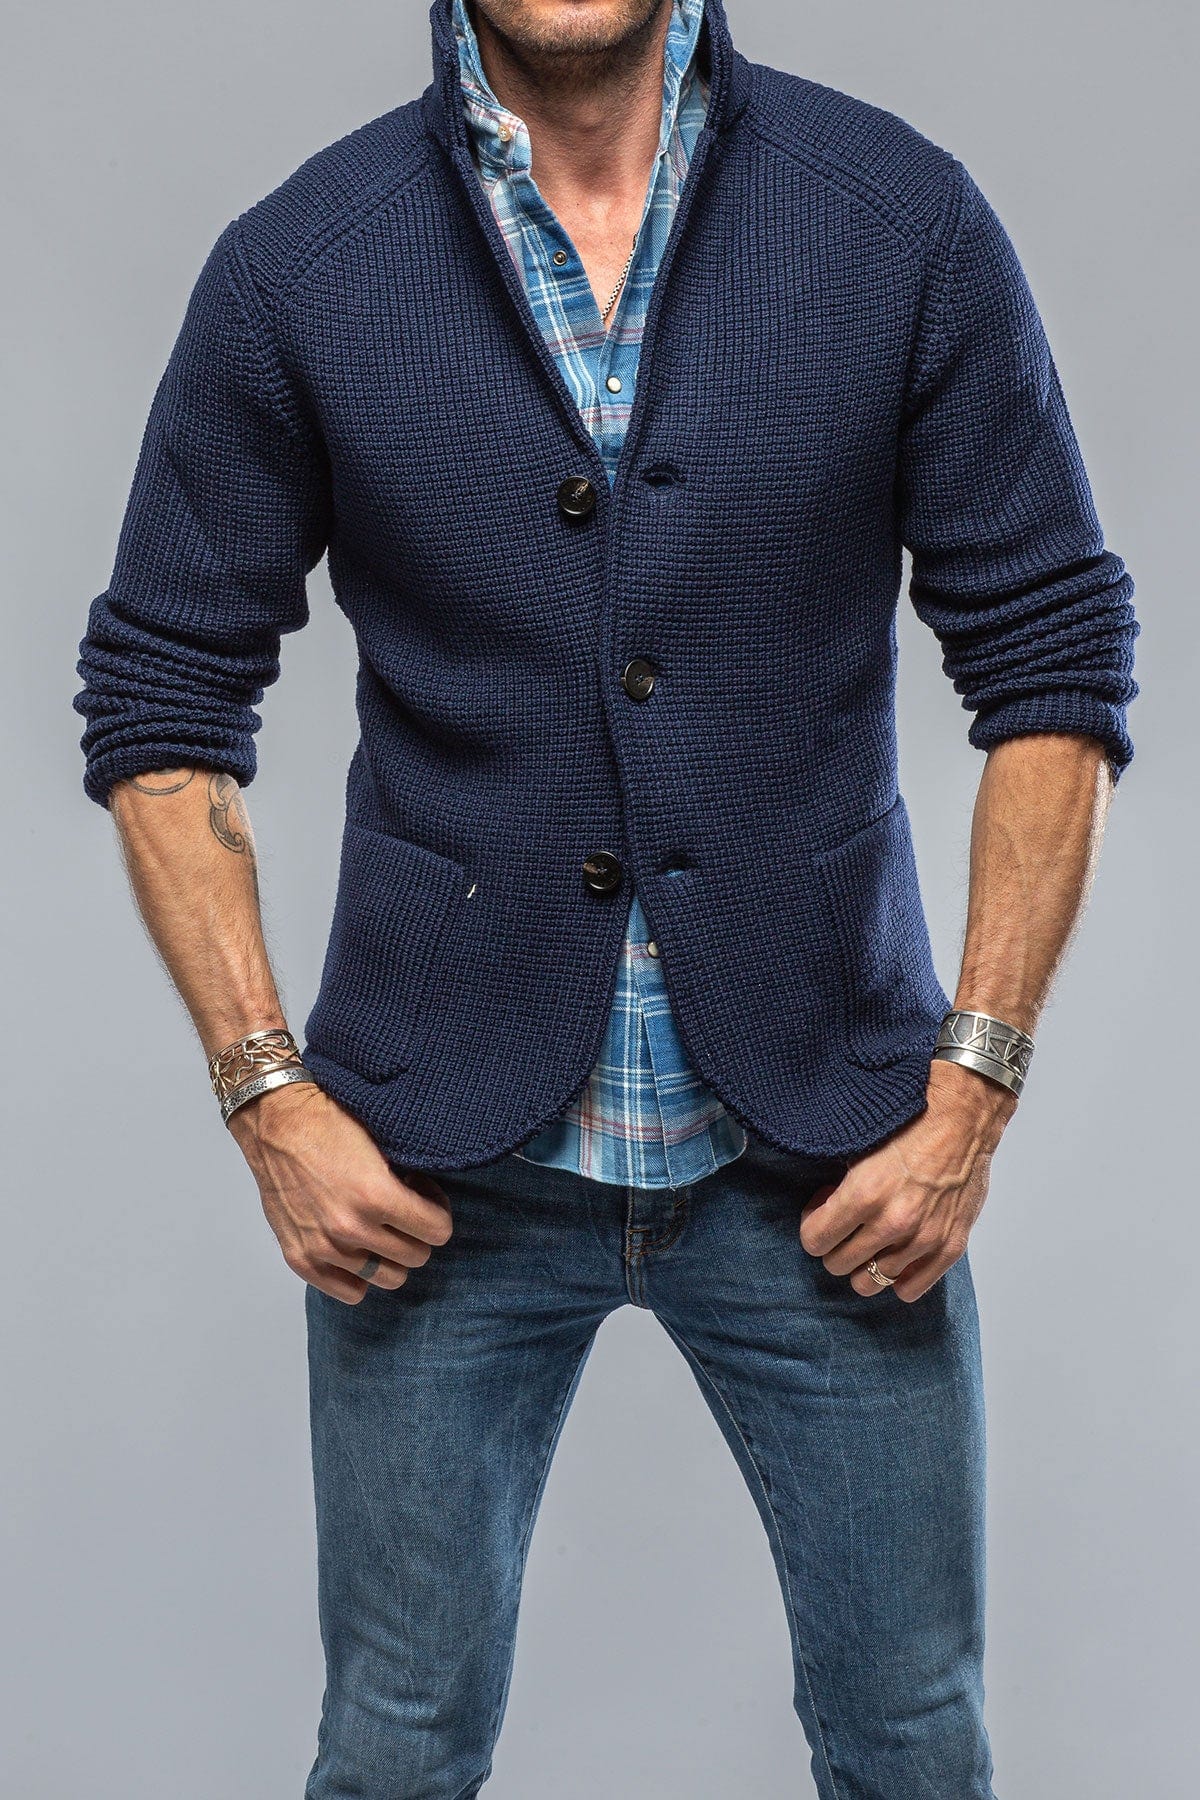 Tuscan Sweater Jacket In Navy - AXEL'S